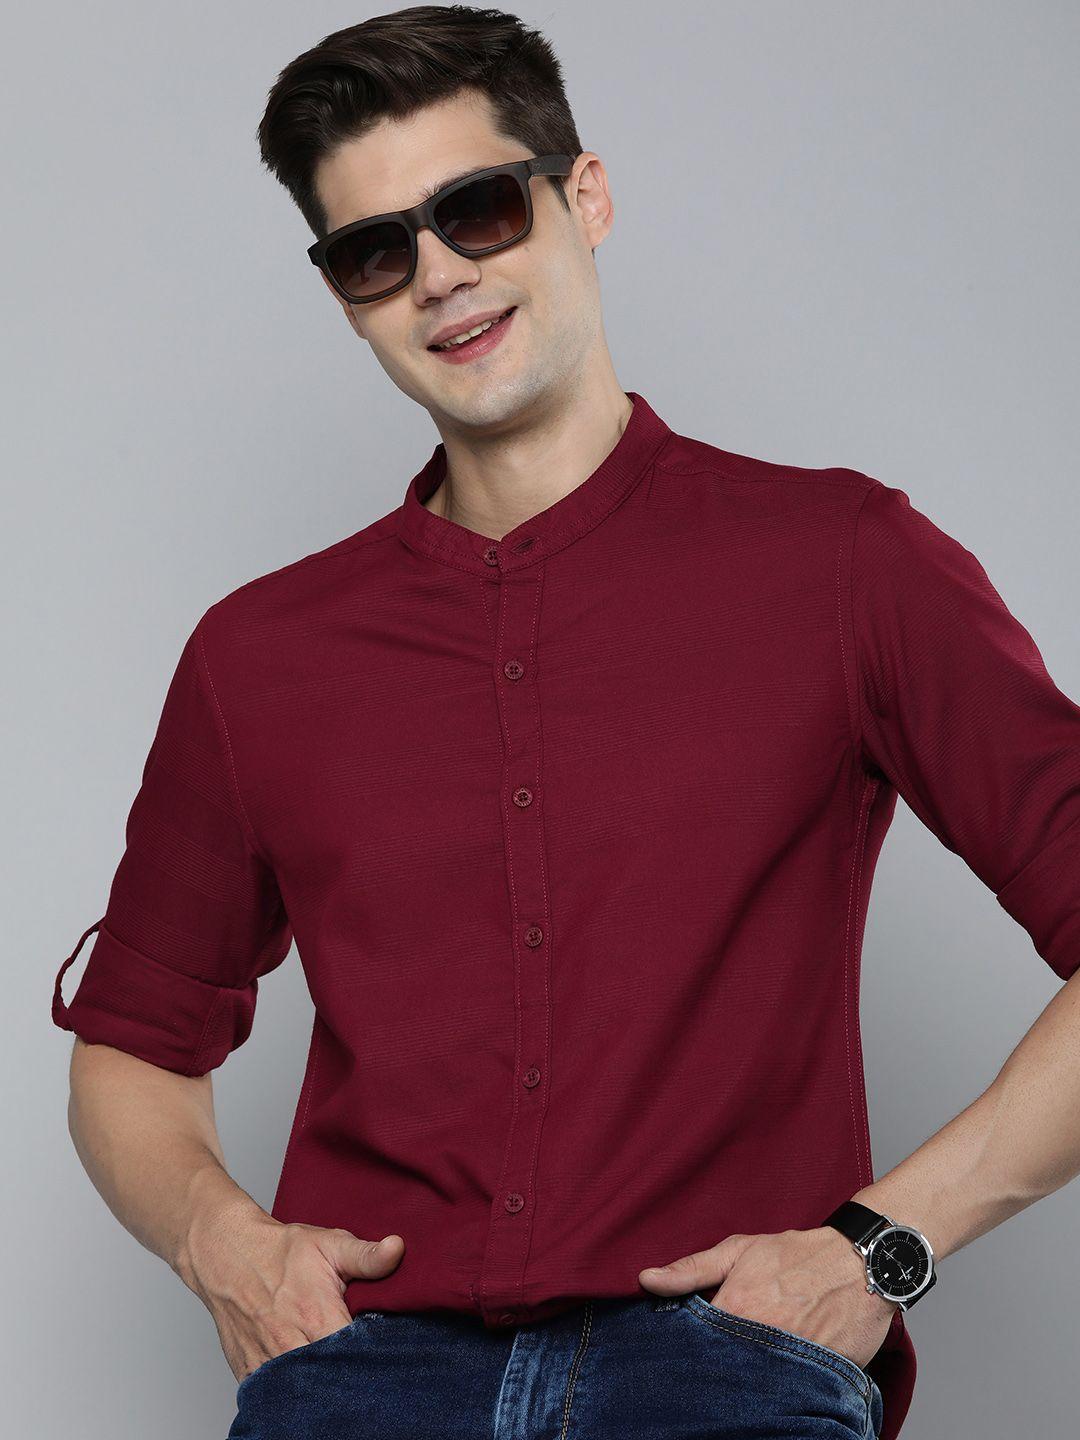 here&now pure cotton slim fit self striped opaque casual shirt